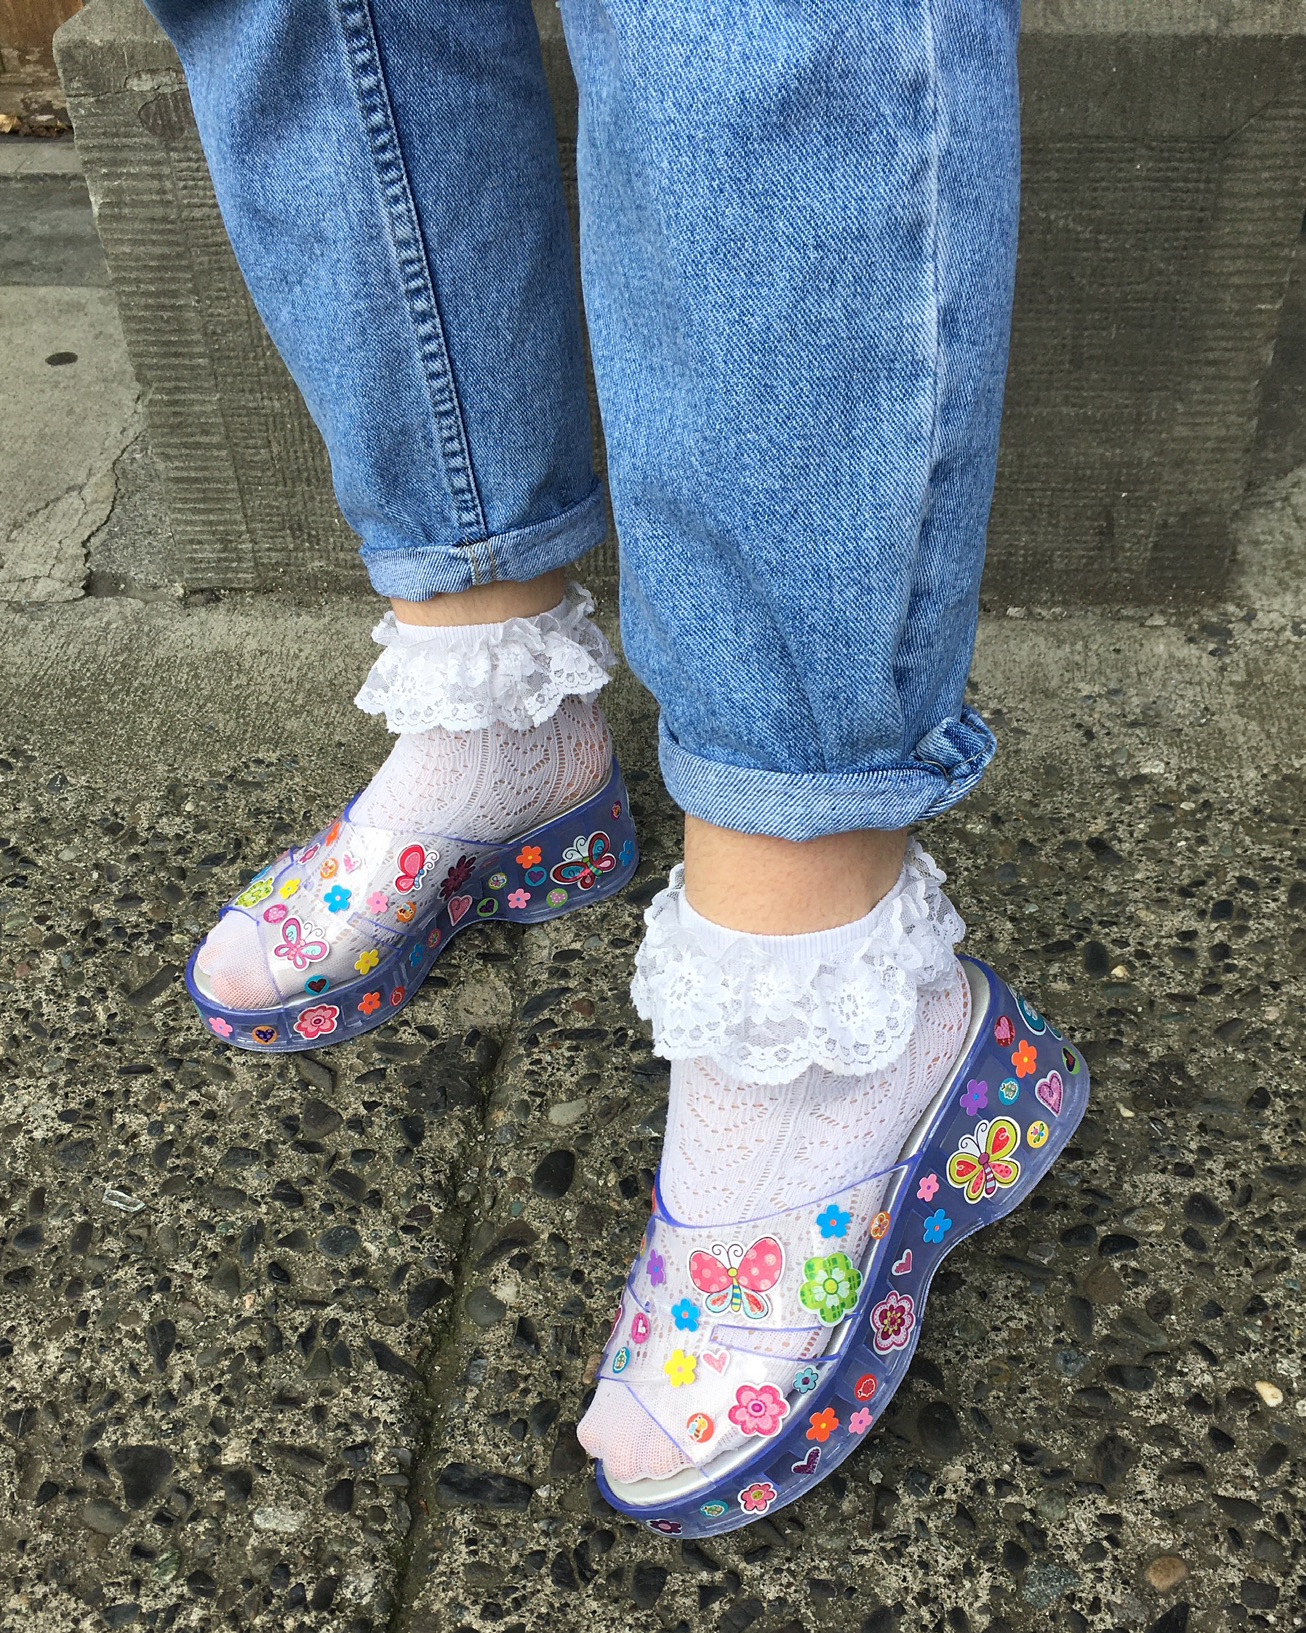 cropped shot of someone wearing transparent plastic shoes covered in stickers, white socks and rolled up jeans